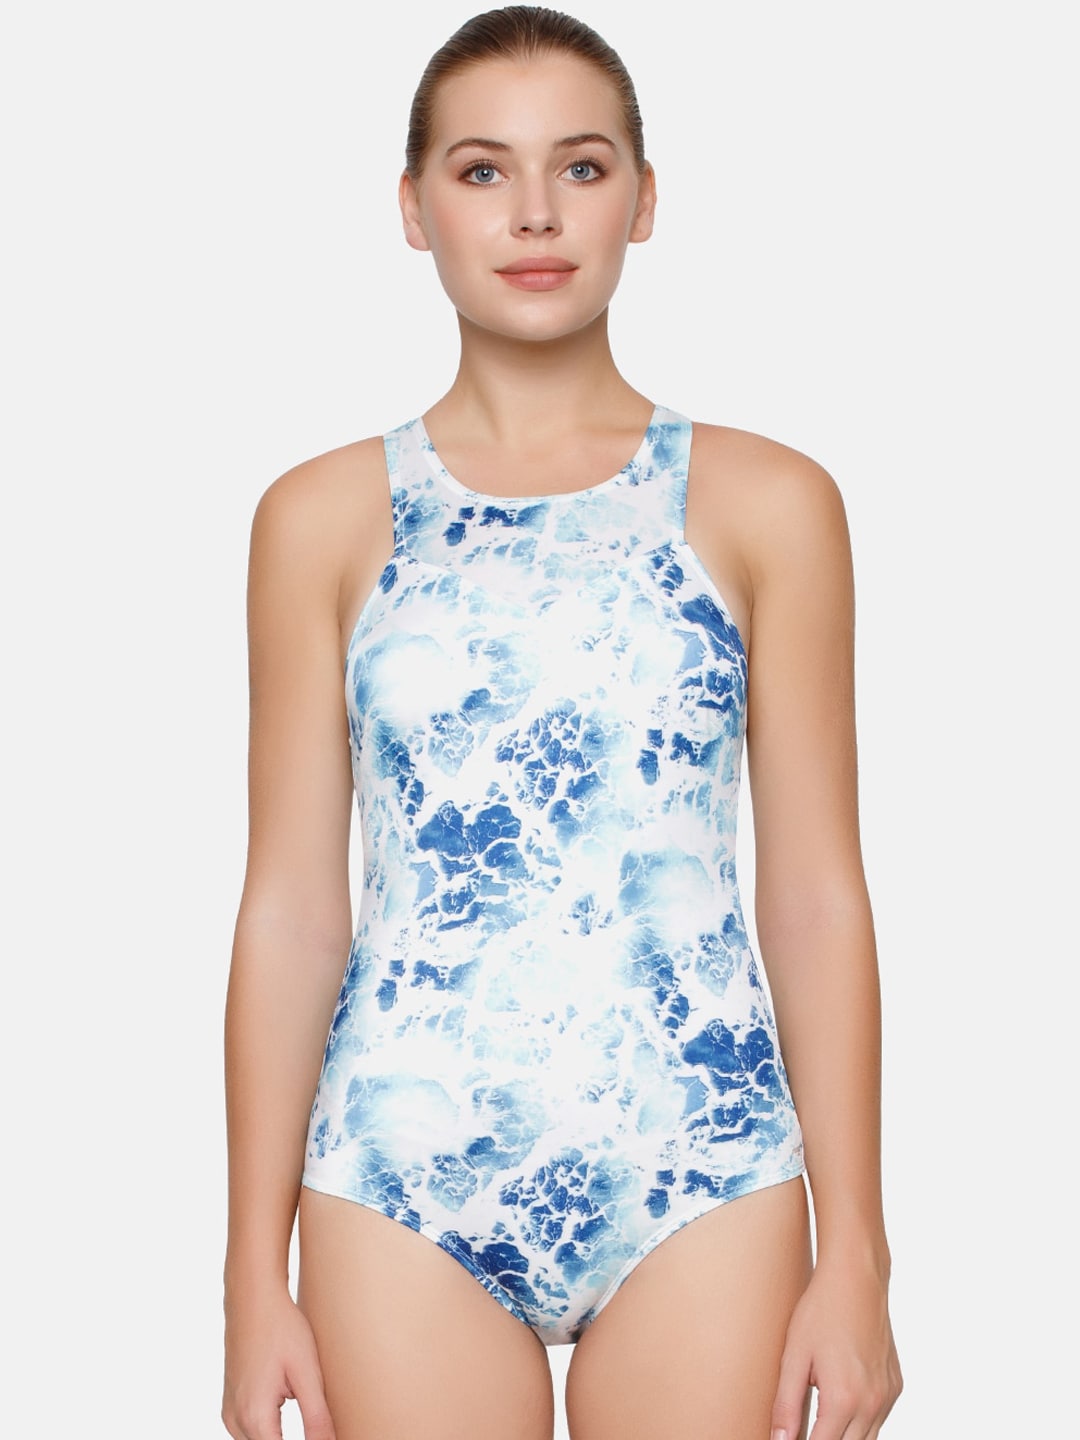 Sloggi Women Shore Yap Islands Recycled Fabric In Built Sun Protection Onepiece Swimsuit Price in India